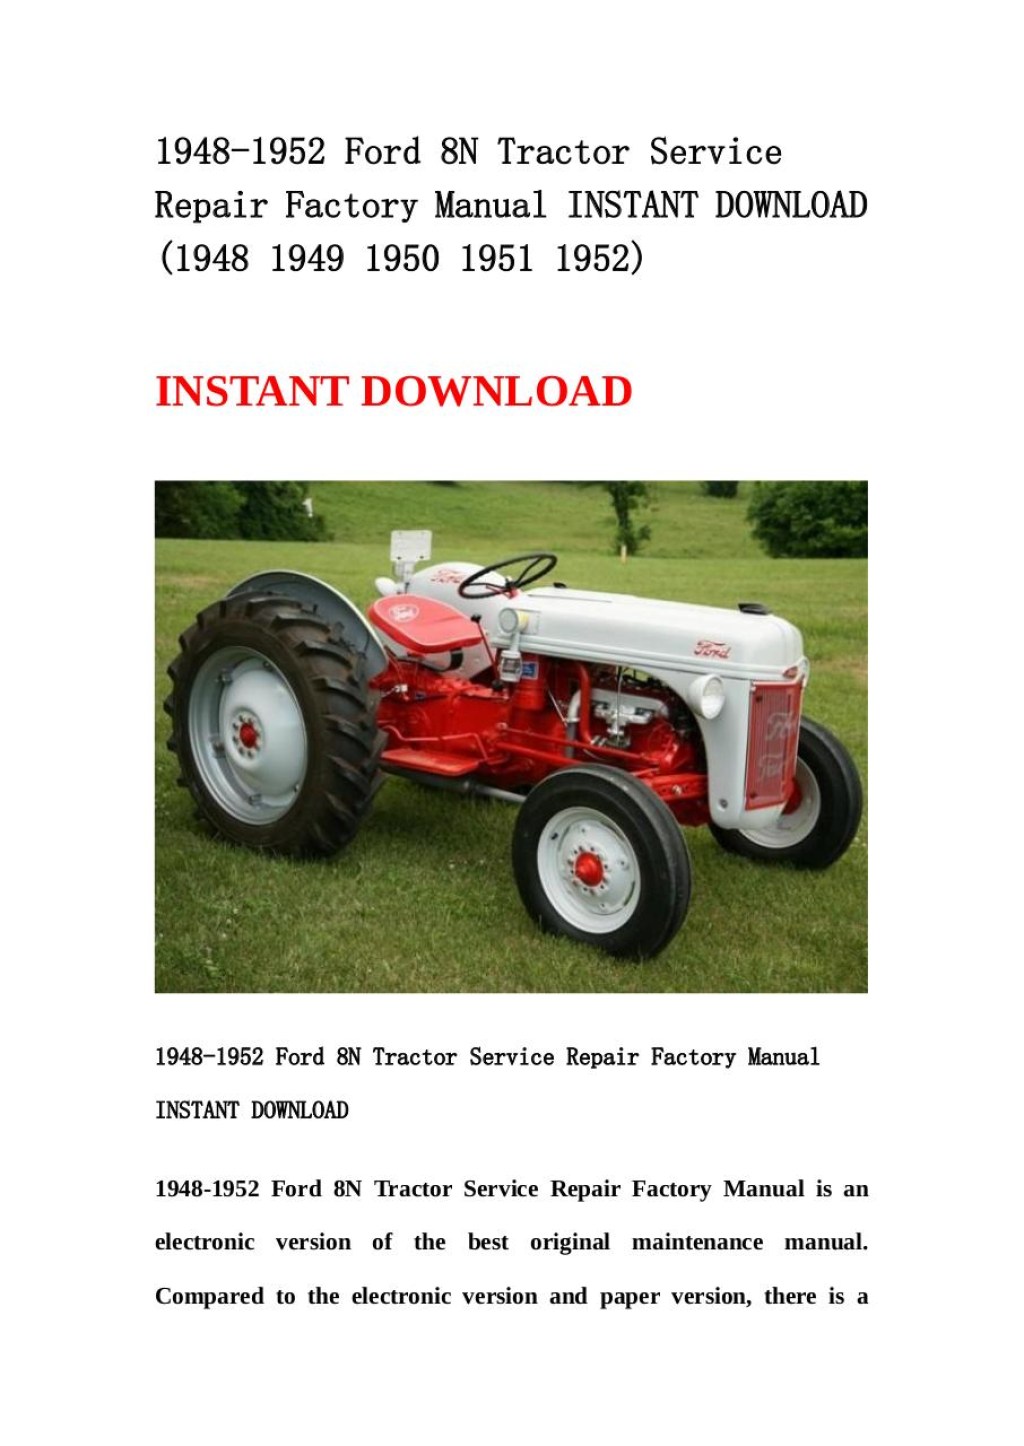 Picture of: Ford N Tractor Service Repair Factory Manual by